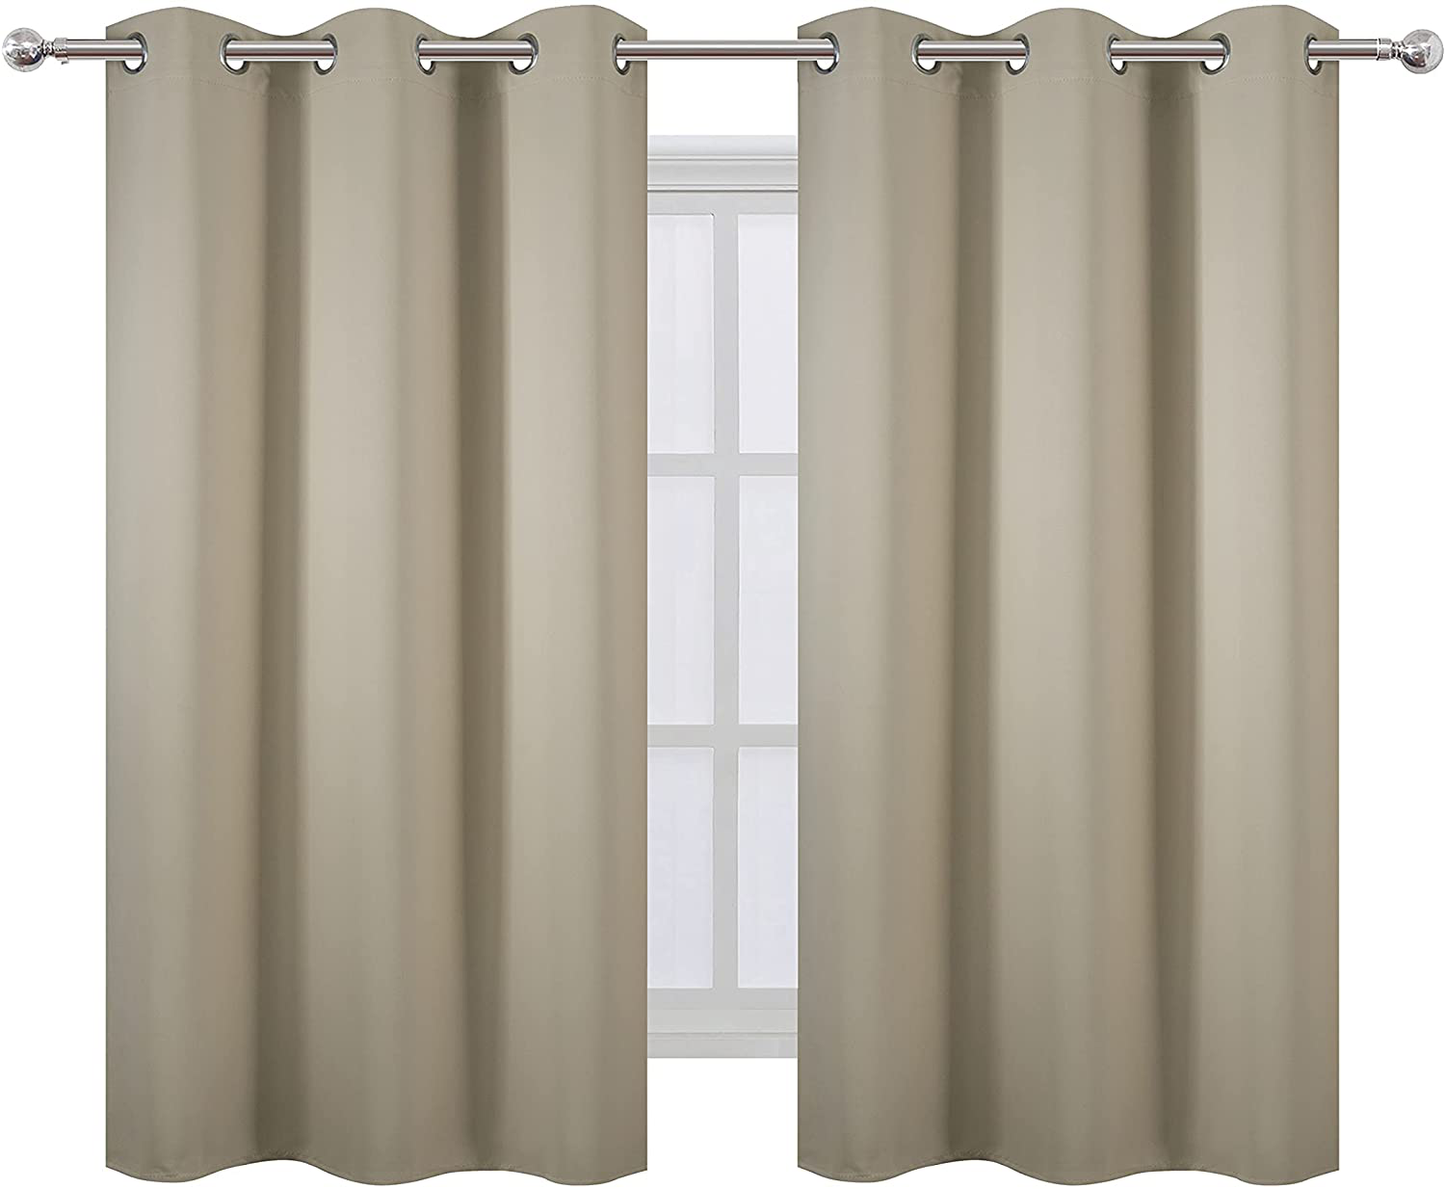 LEMOMO Blackout Curtains 52 x 84 Inch/Beige Curtains Set of 2 Panels/Room Darkening Curtains for Bedroom and Living Room